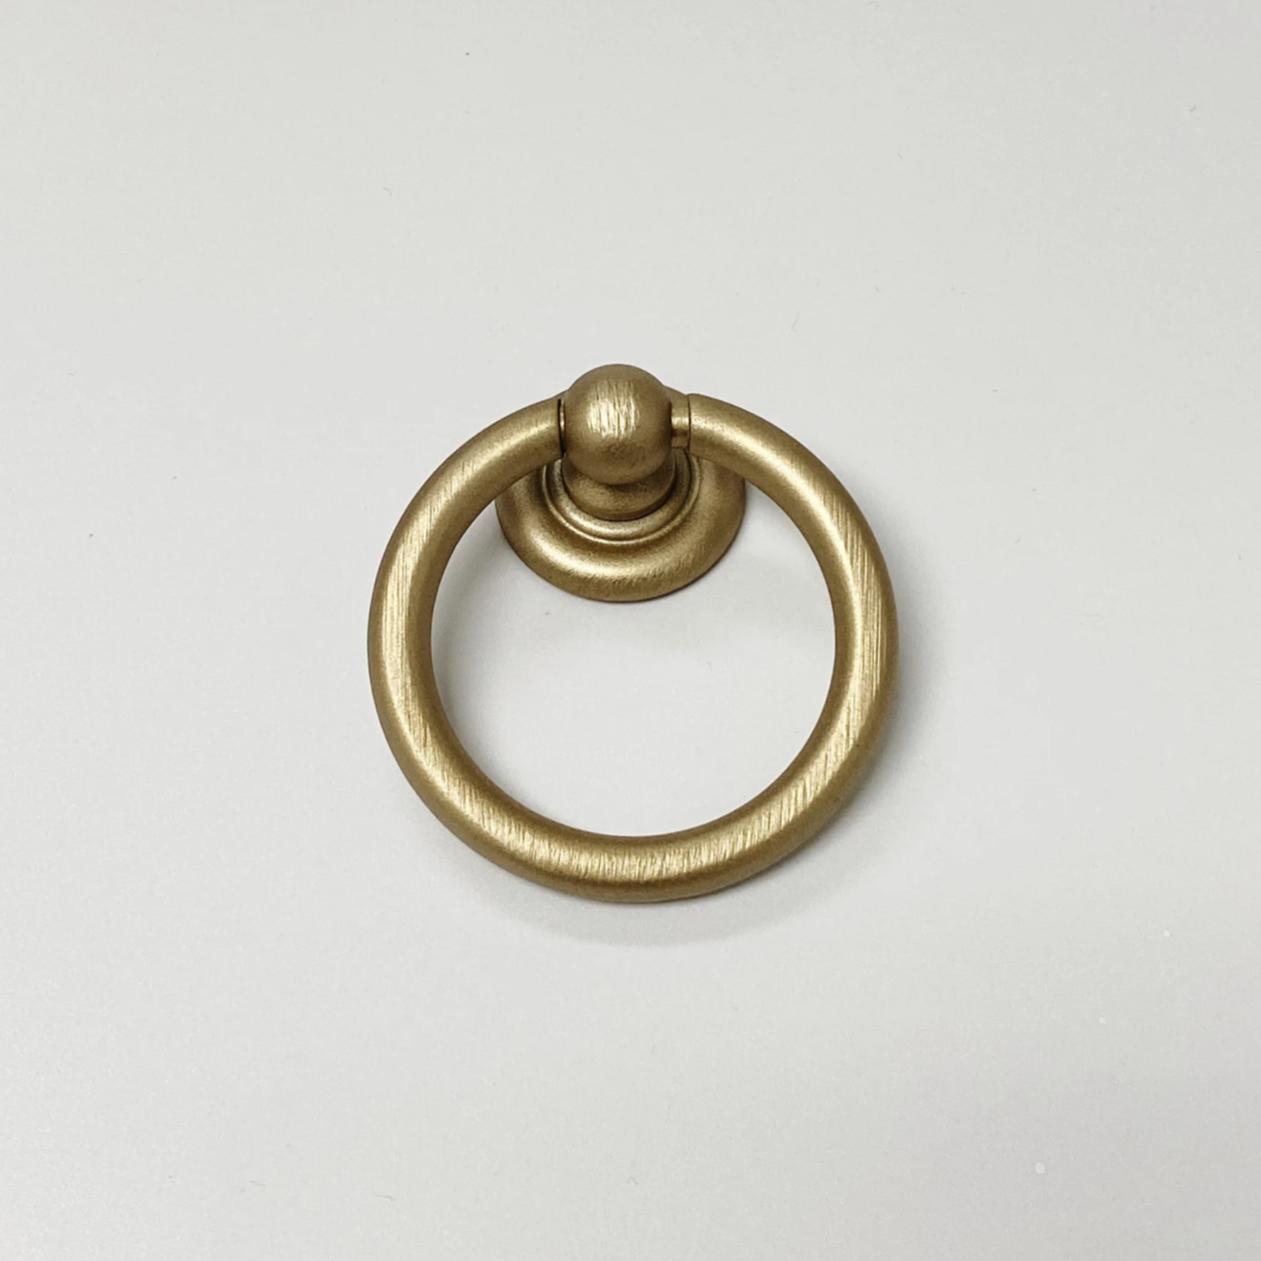 Brushed Gold "Capri" Cup Drawer Pull, Ring Pull or Round Cabinet Knob | Pulls